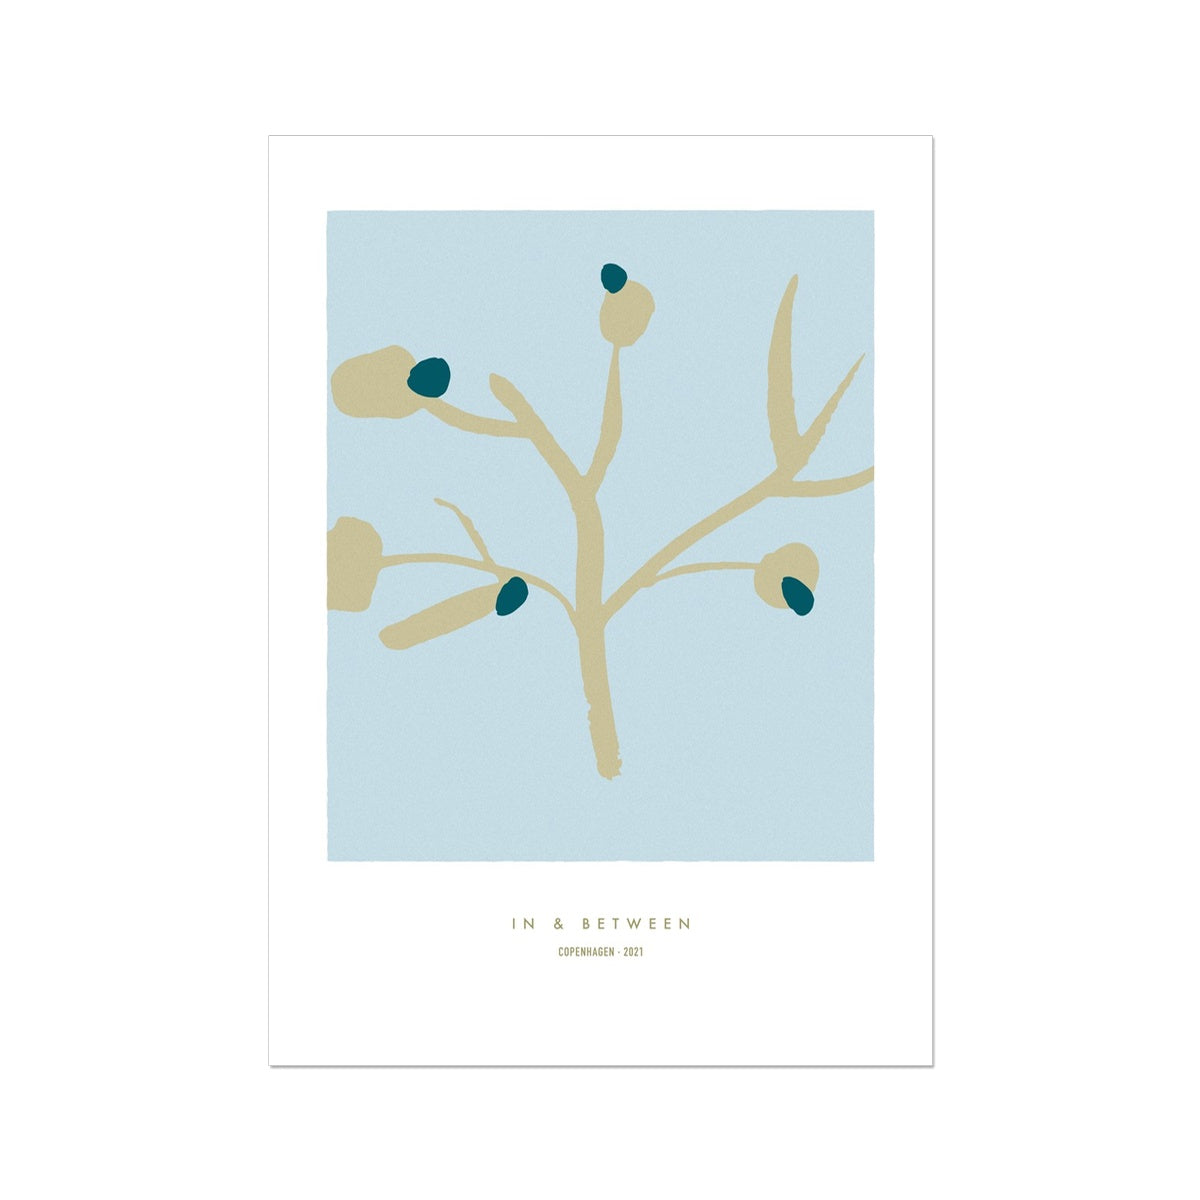 Upright golden olive tree branch with dark green olives on a light blue background.